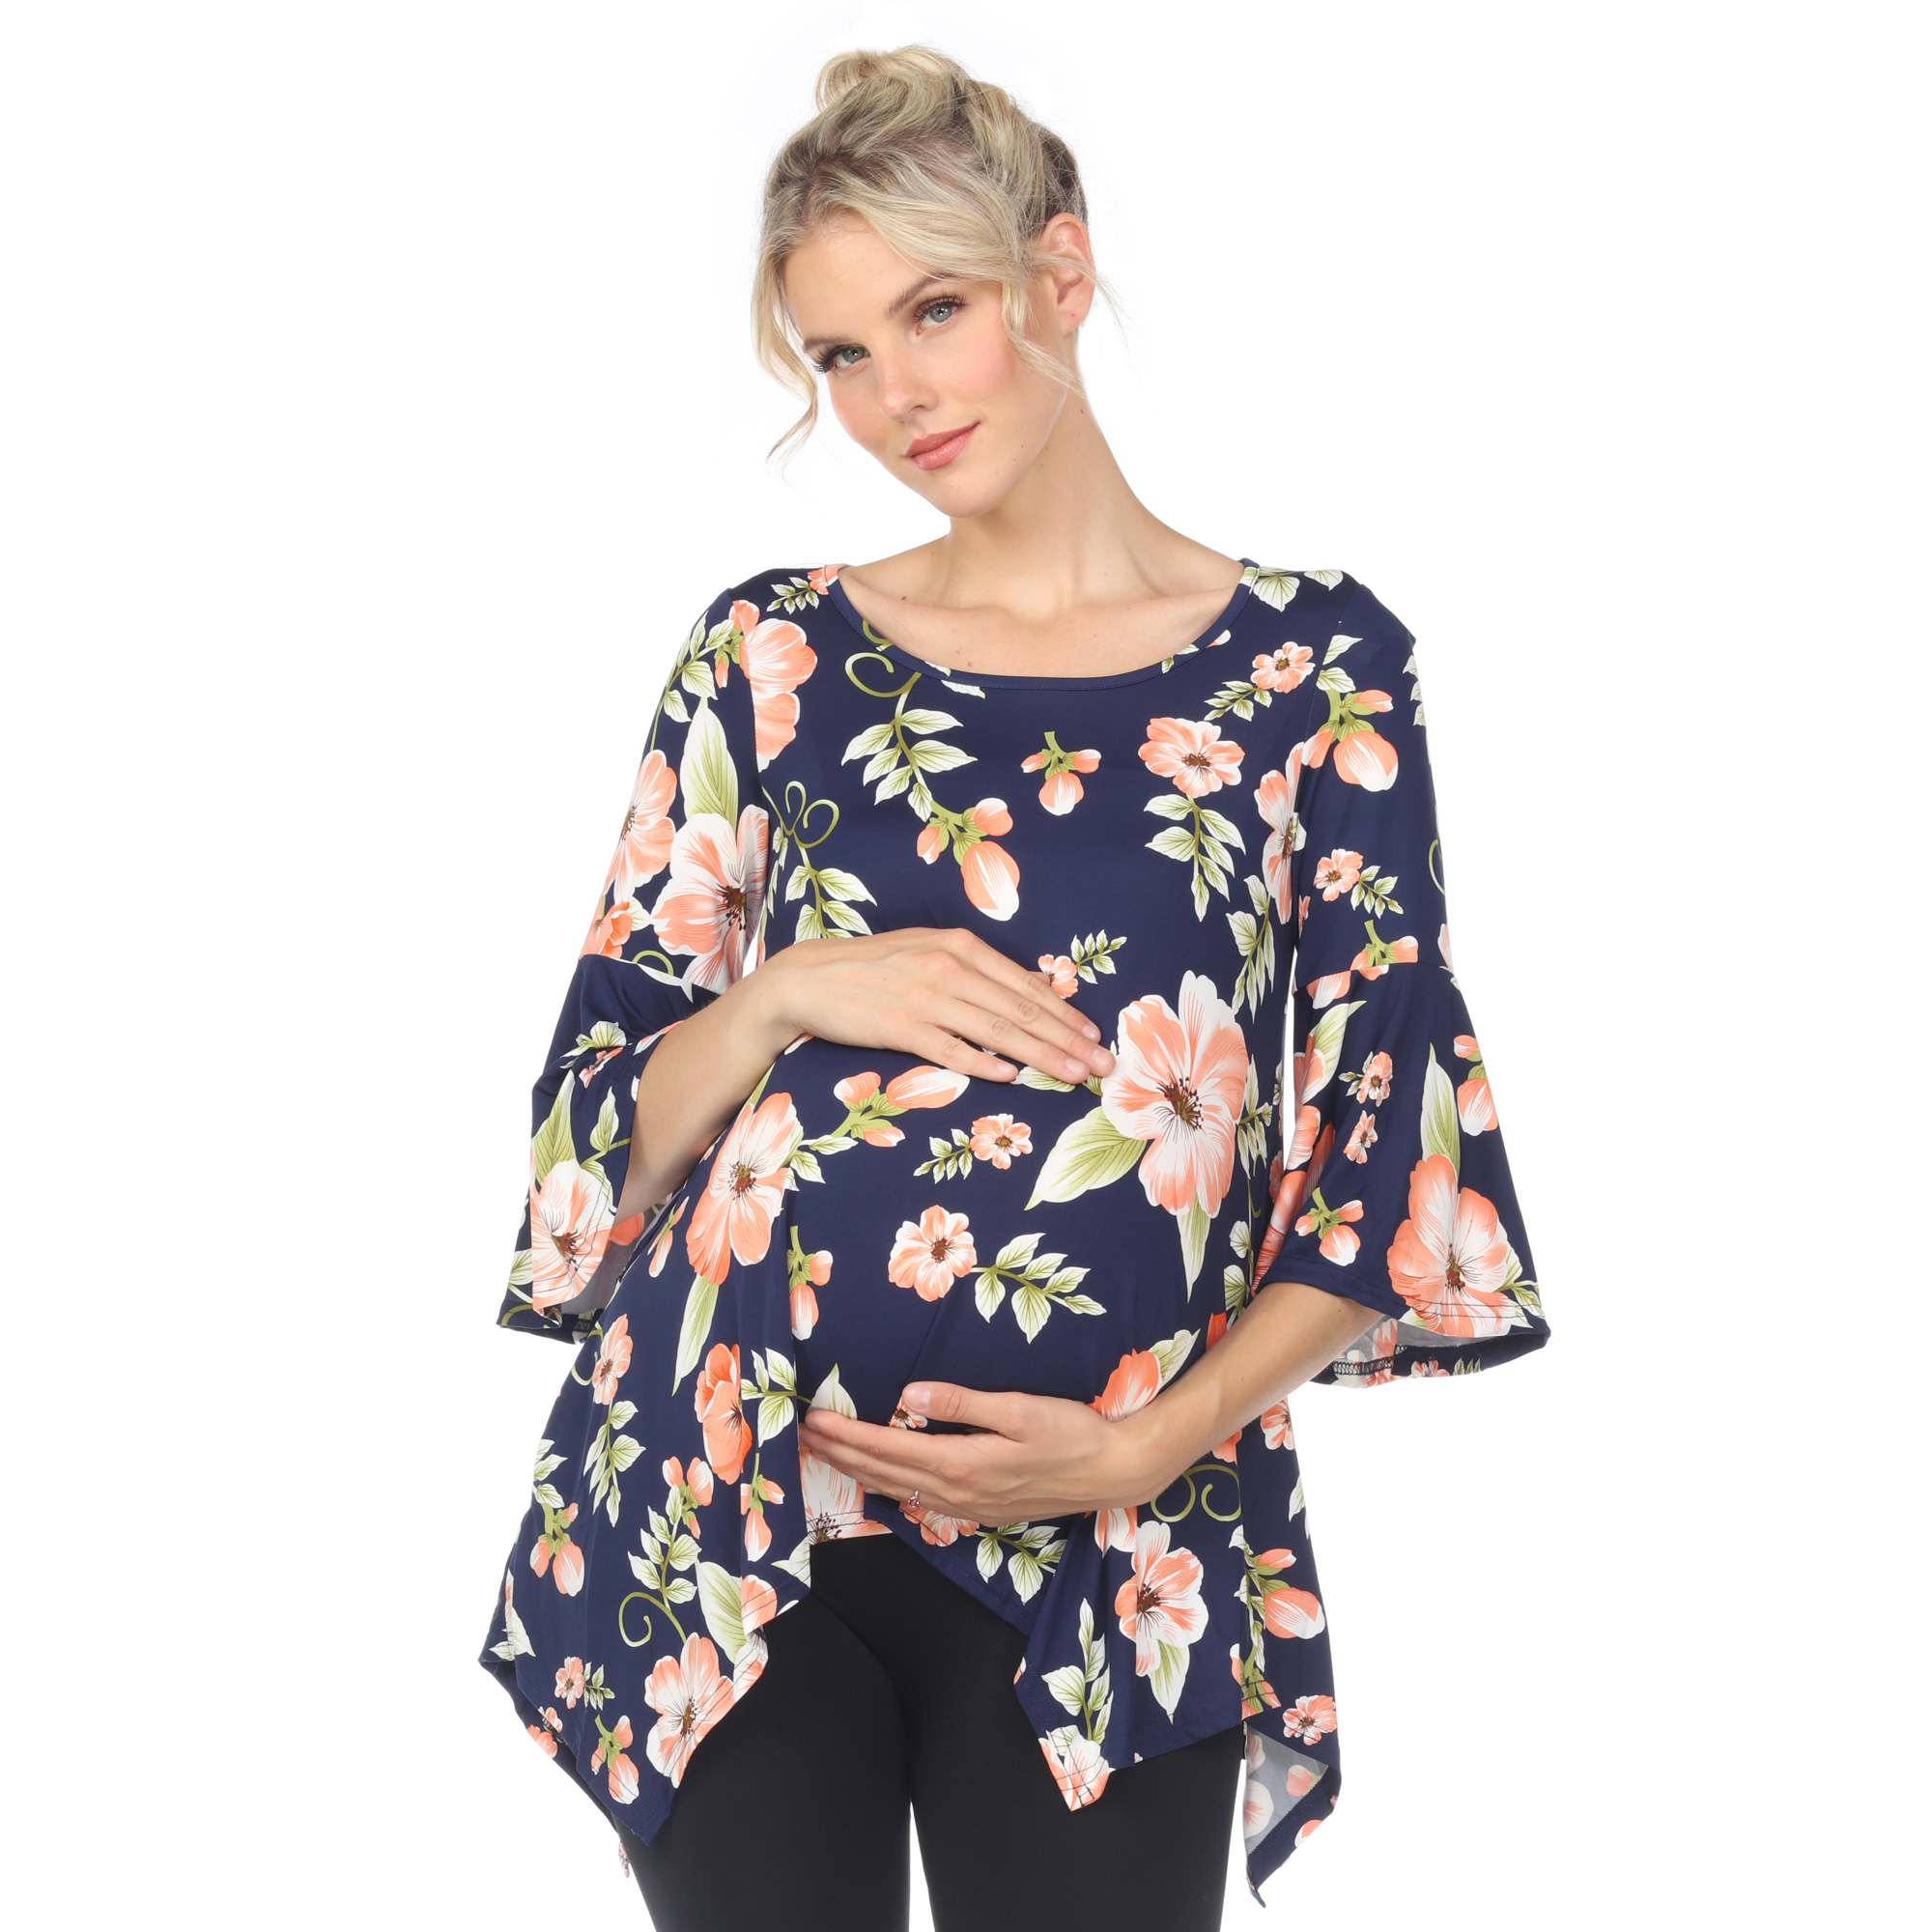 White Mark Women's Maternity Floral Print Quarter Sleeve Tunic Top With Pockets - Peach Flower, 2X